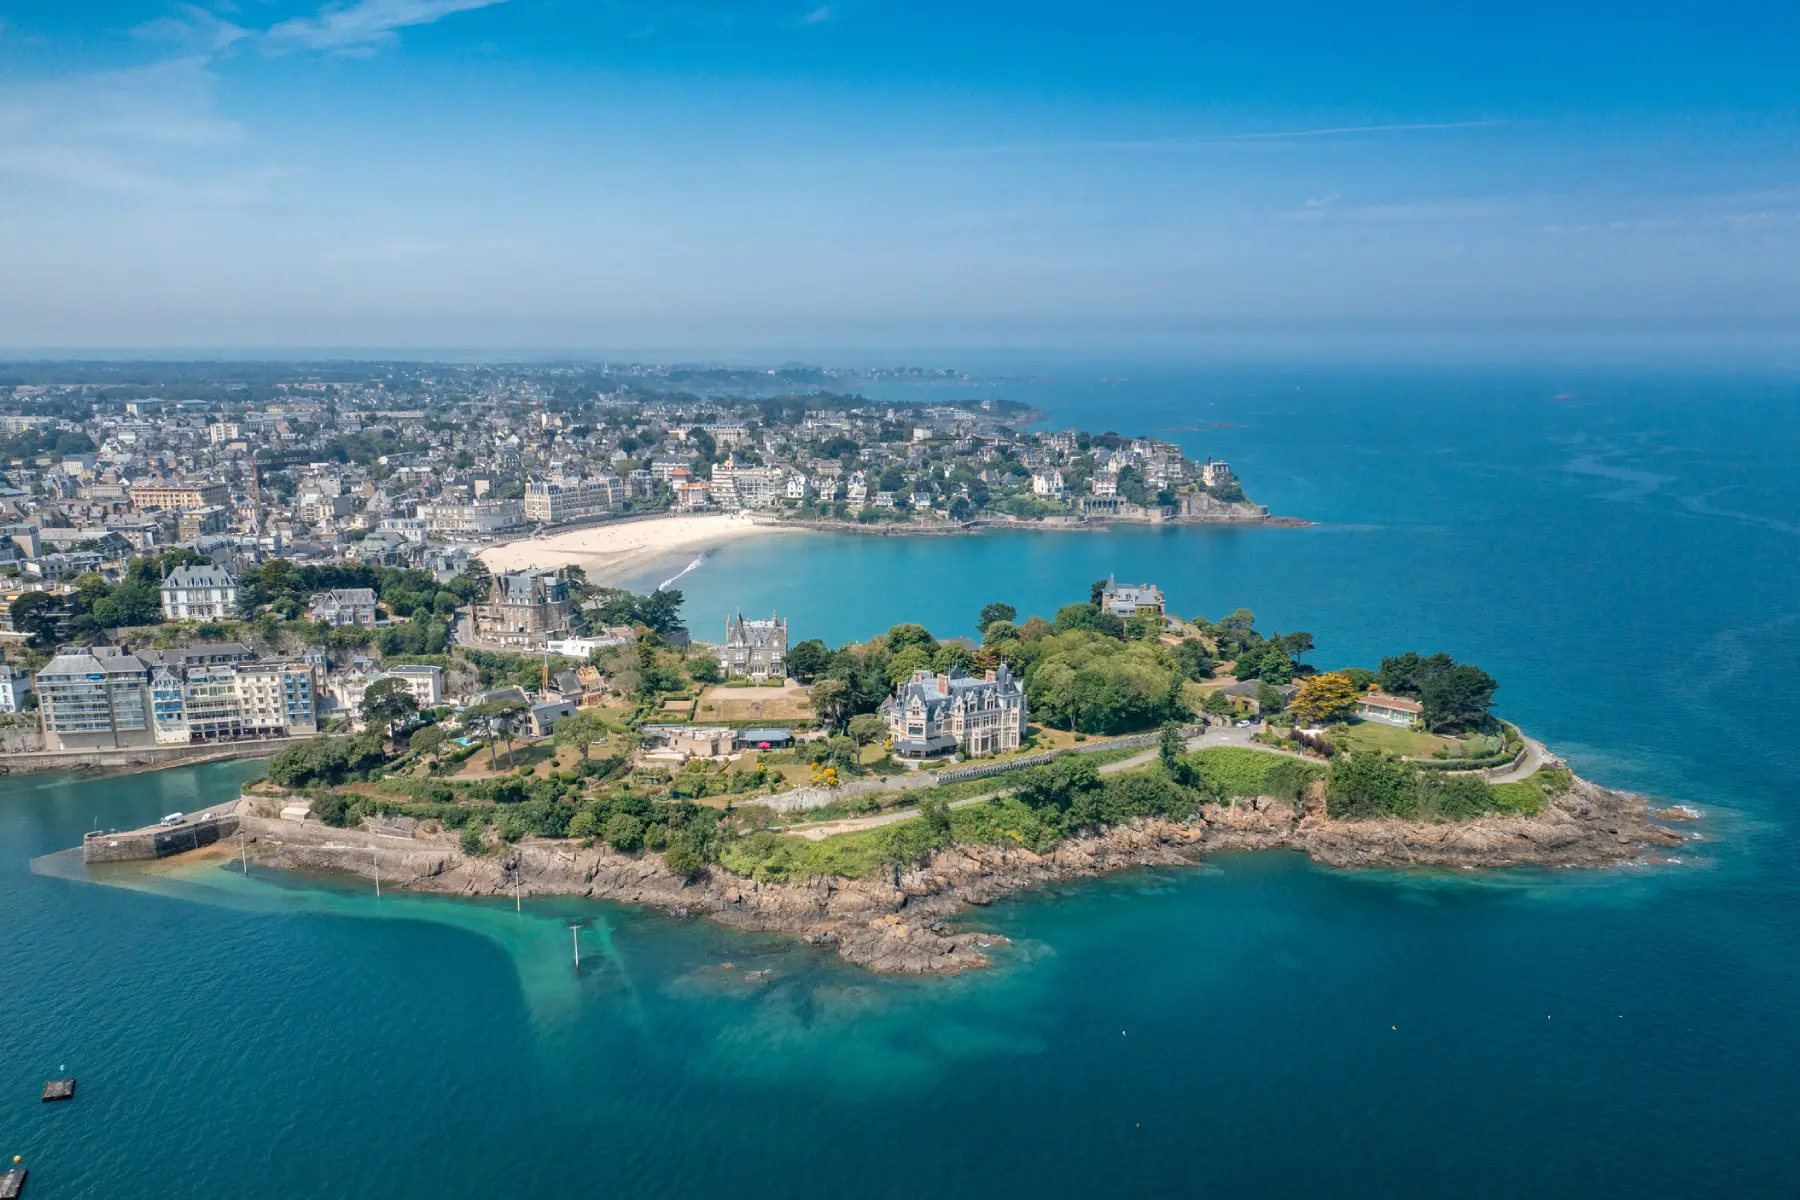 An aerial view of Dinard on a clear sunny day with the bright blue sea surrounding the rocky coastline